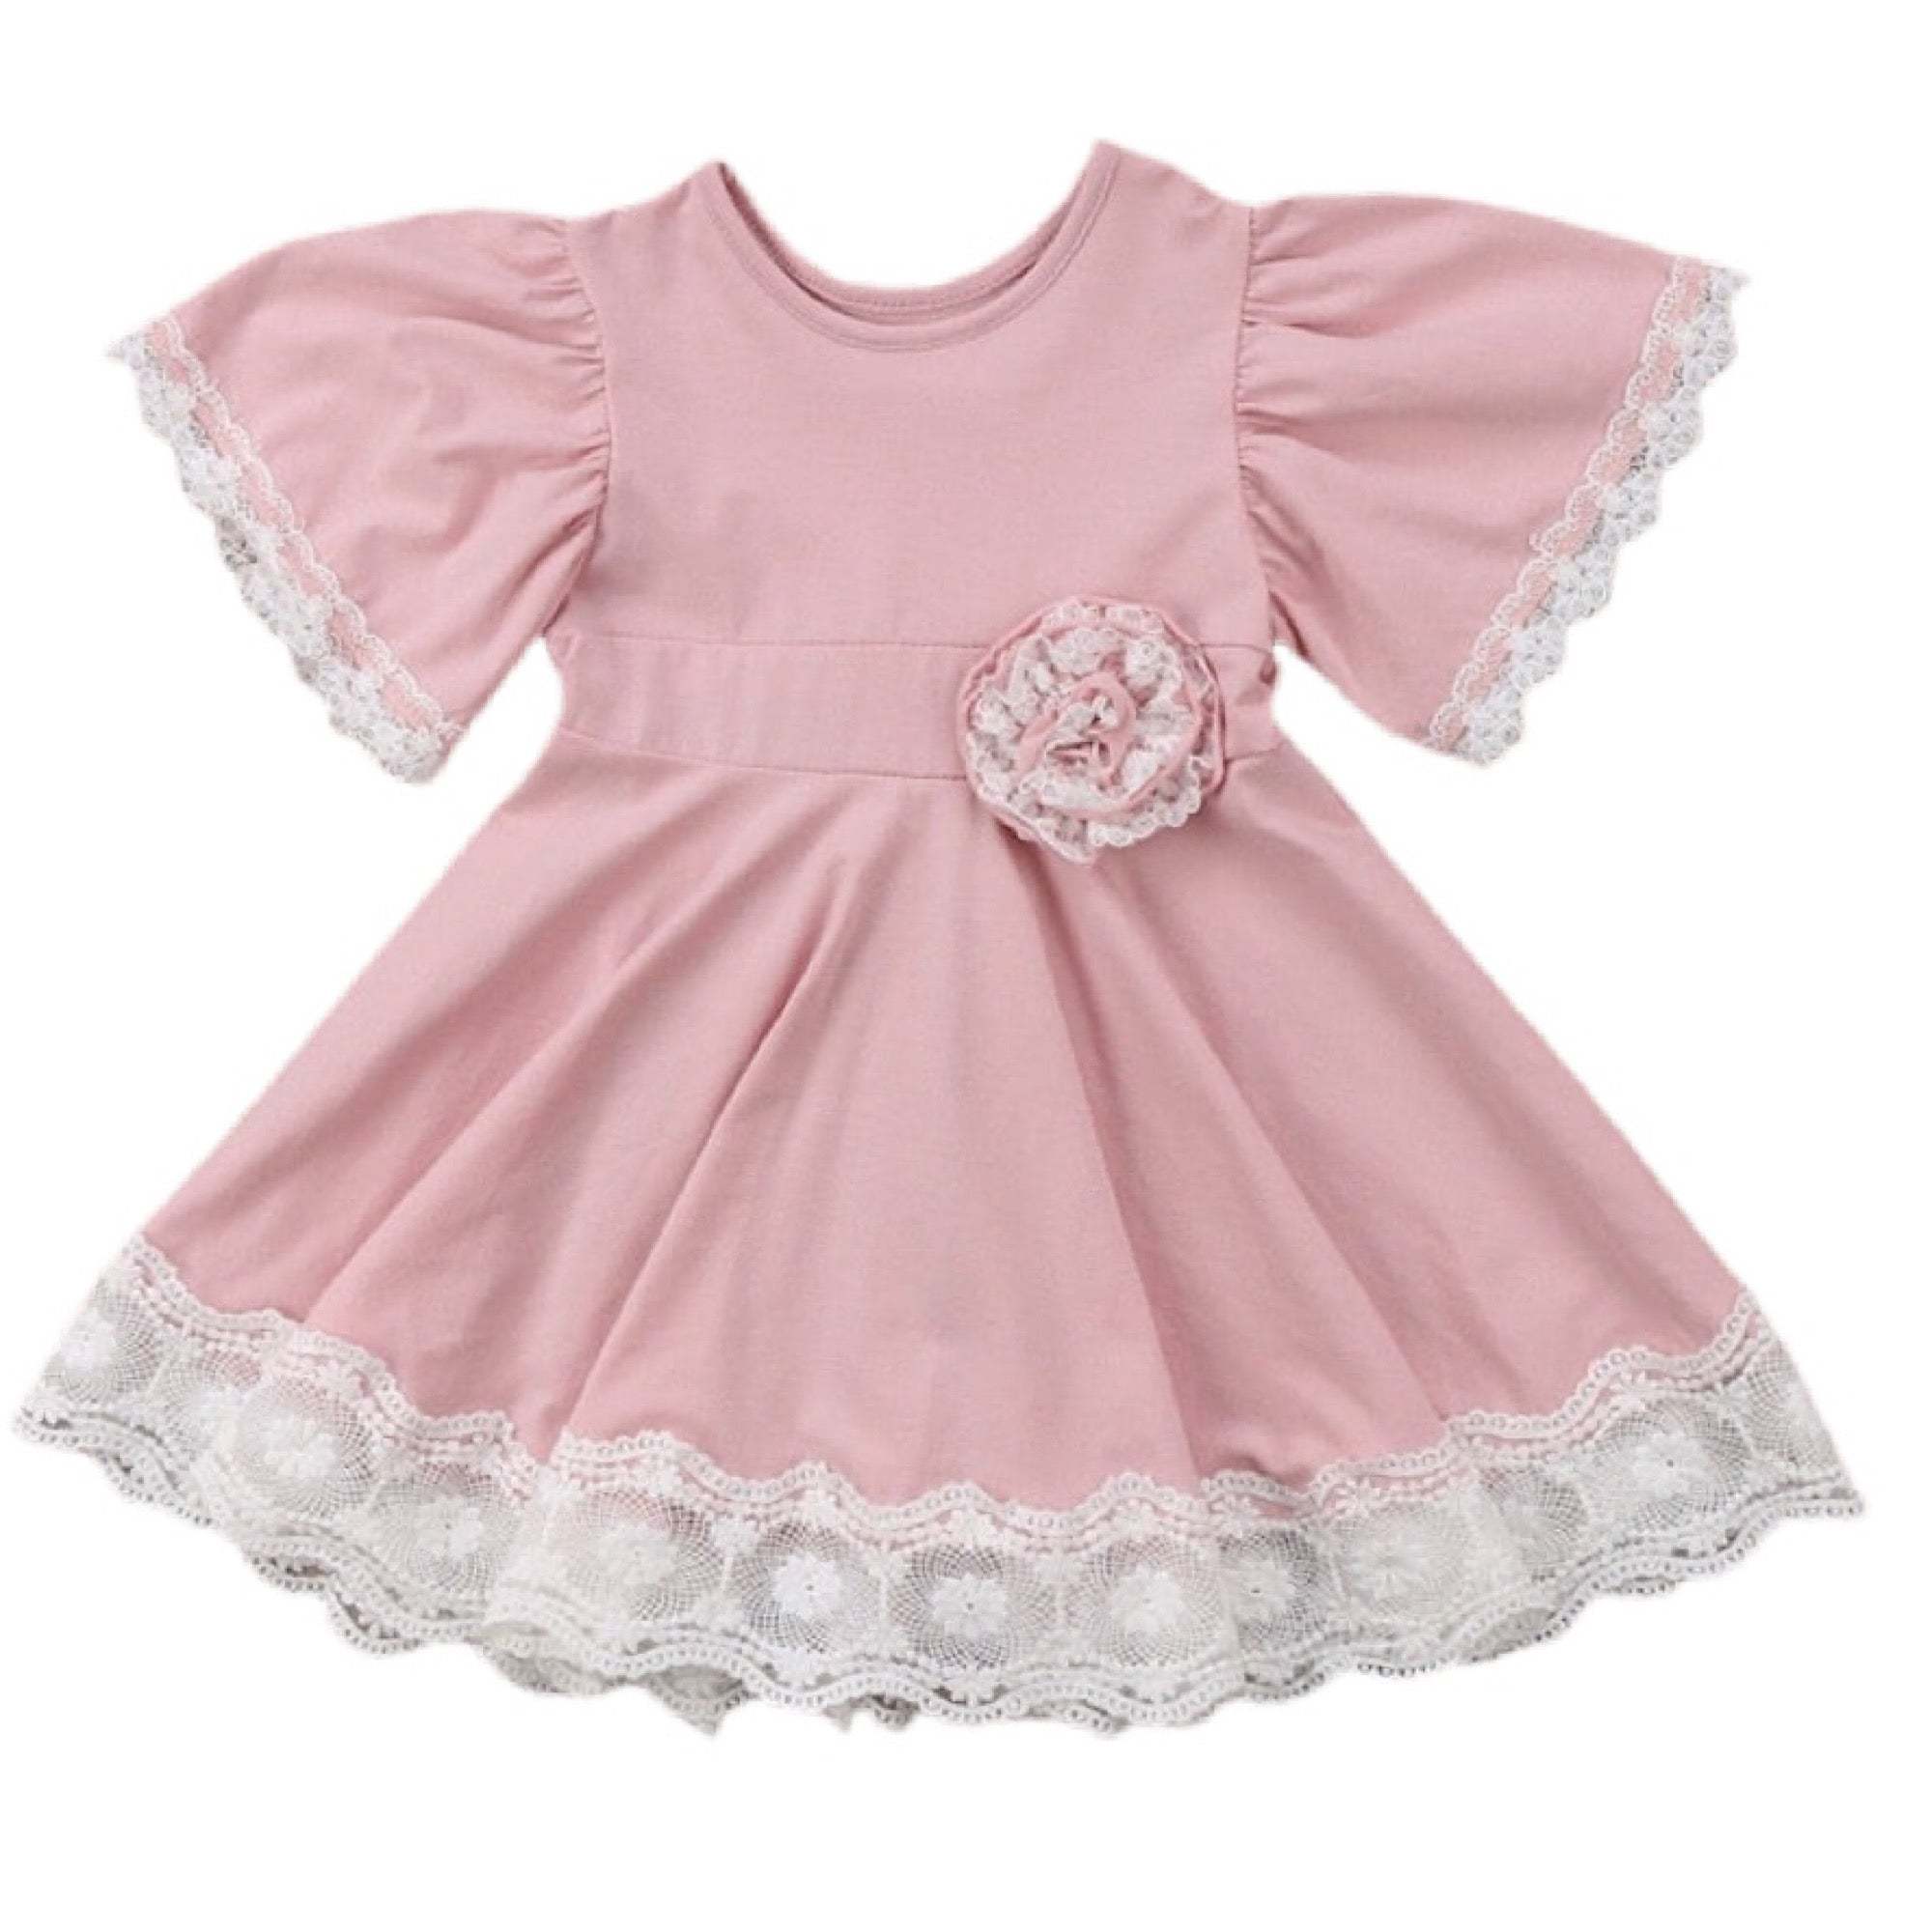 Kids Baby Girls Dress Lace Floral Party Dresses Summer Short Sleeve Round Neck Bridesmaid Girl Pink Easter Princess